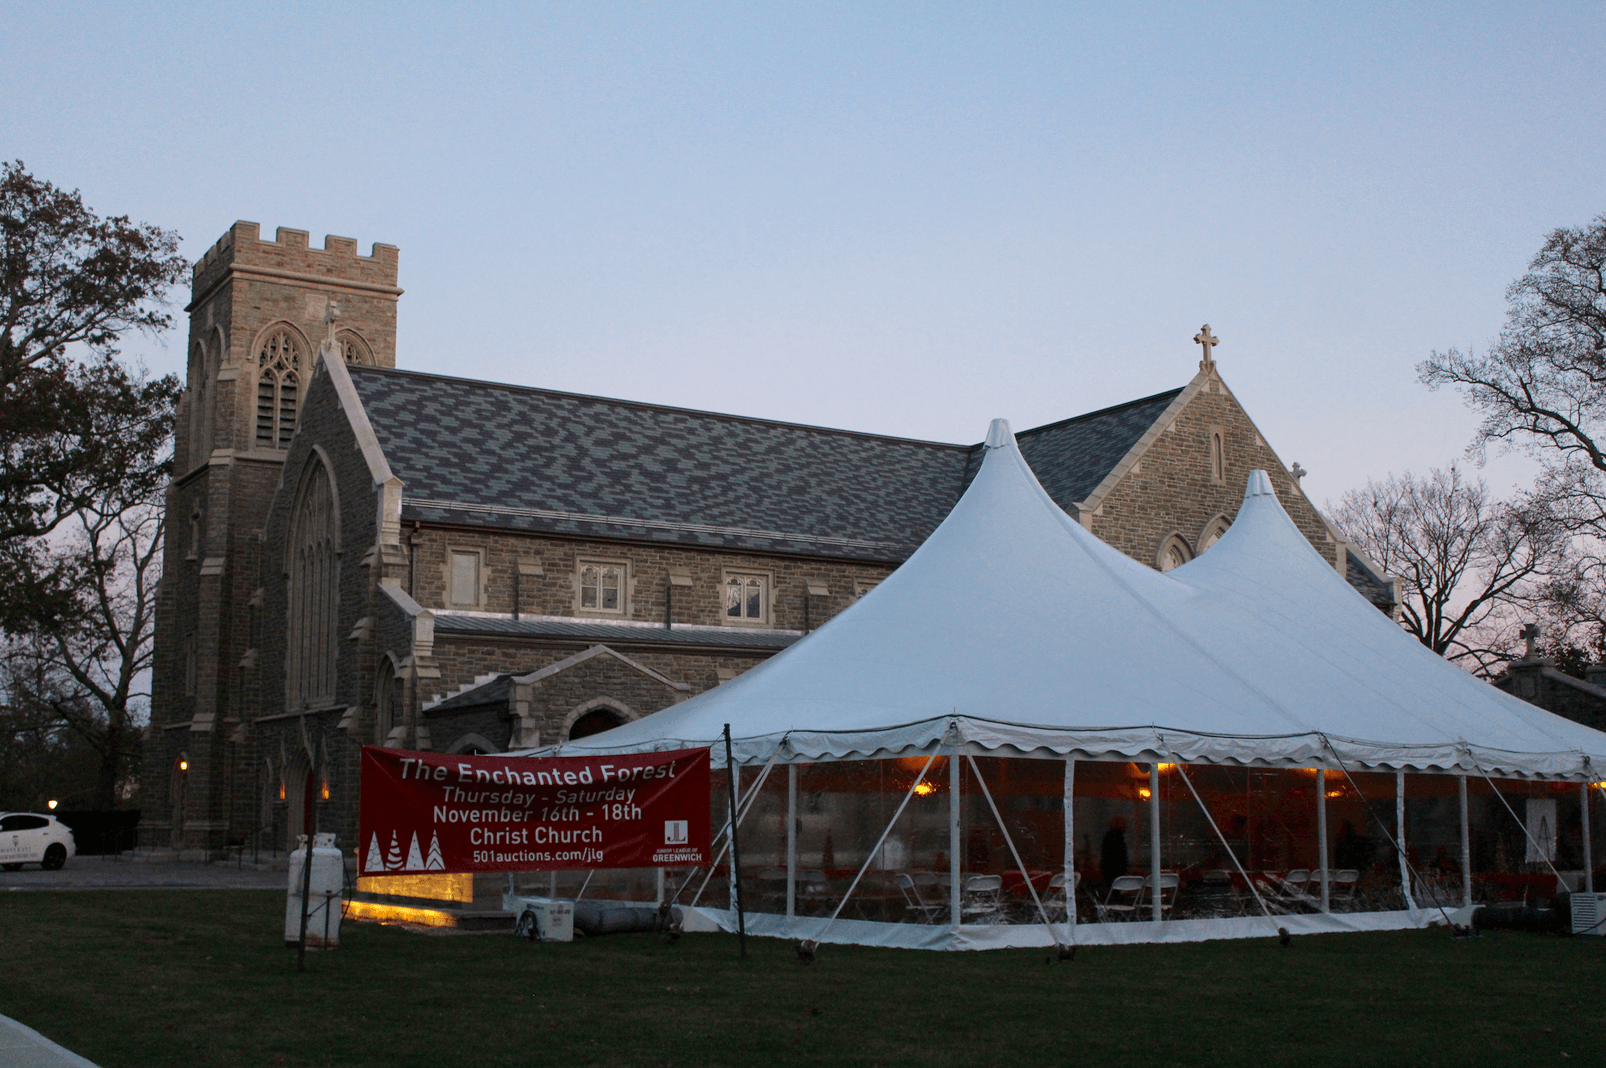 A giant white tent is set up in front of Chris Church to make room for children's activities during the Enchanted Forest, which runs through Nov 18, 2017 Photo: Leslie Yager